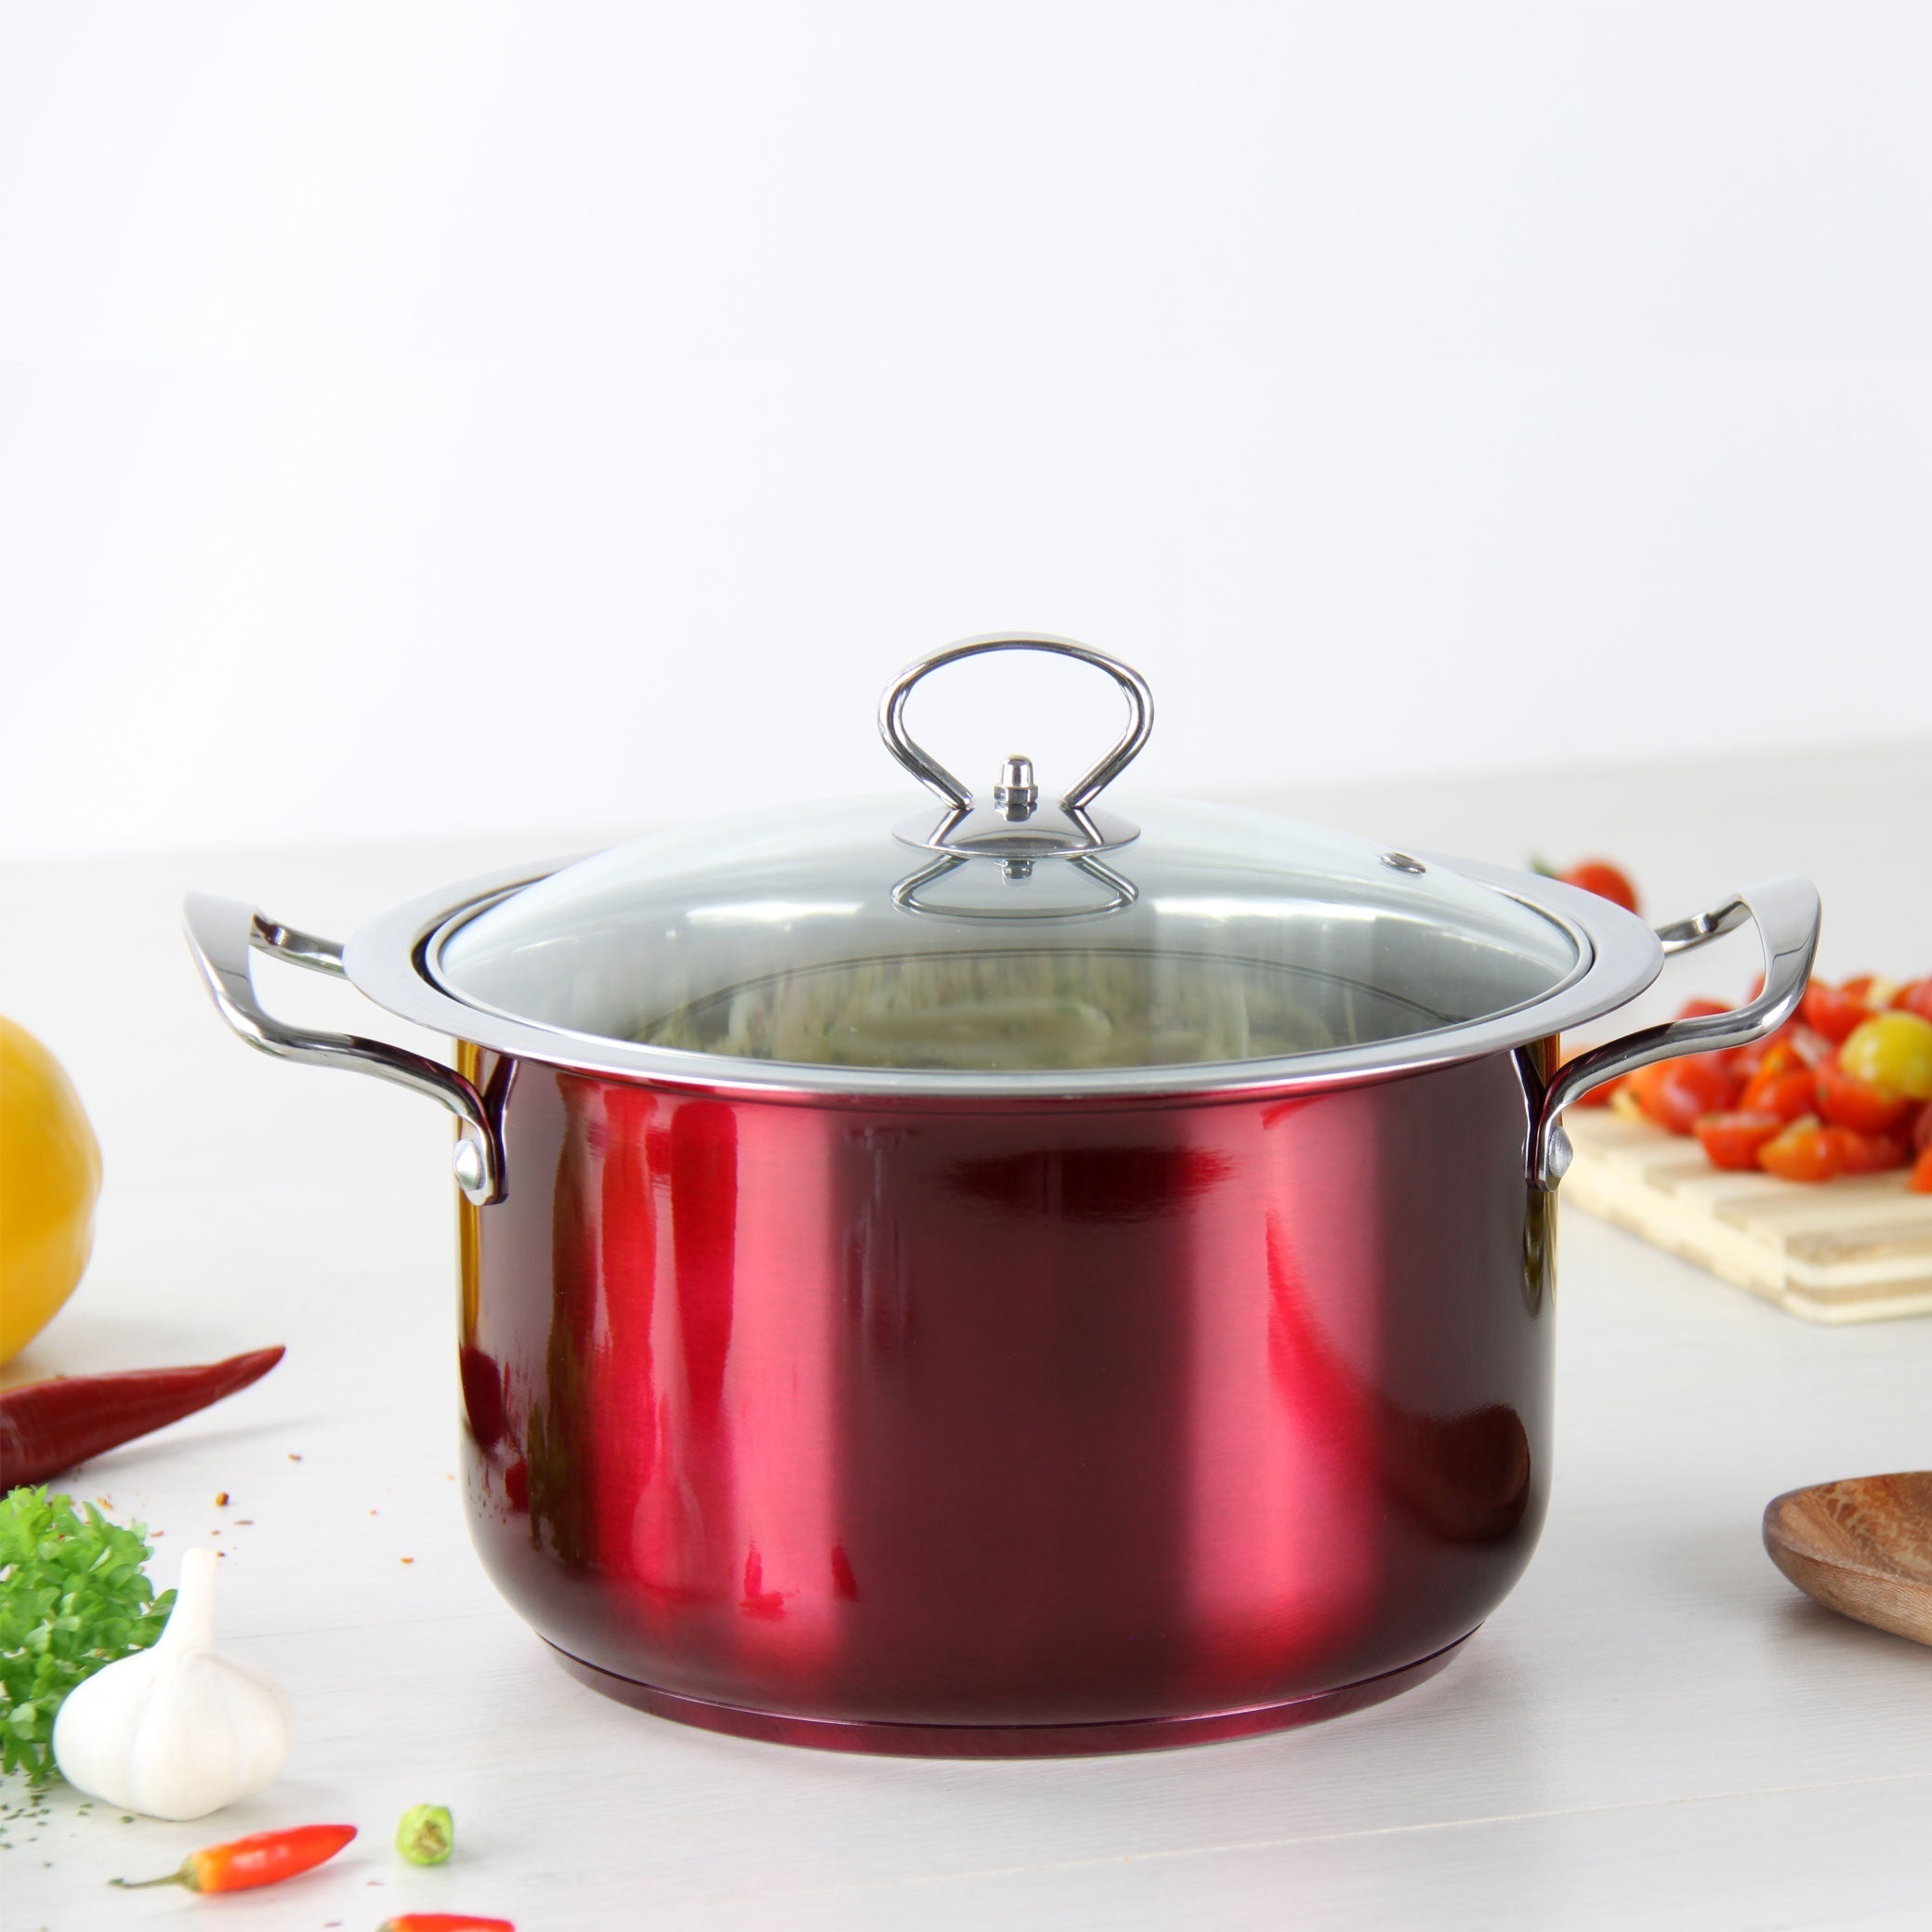 Stainless Steel Stockpot - Induction Base - RUBY -24cm